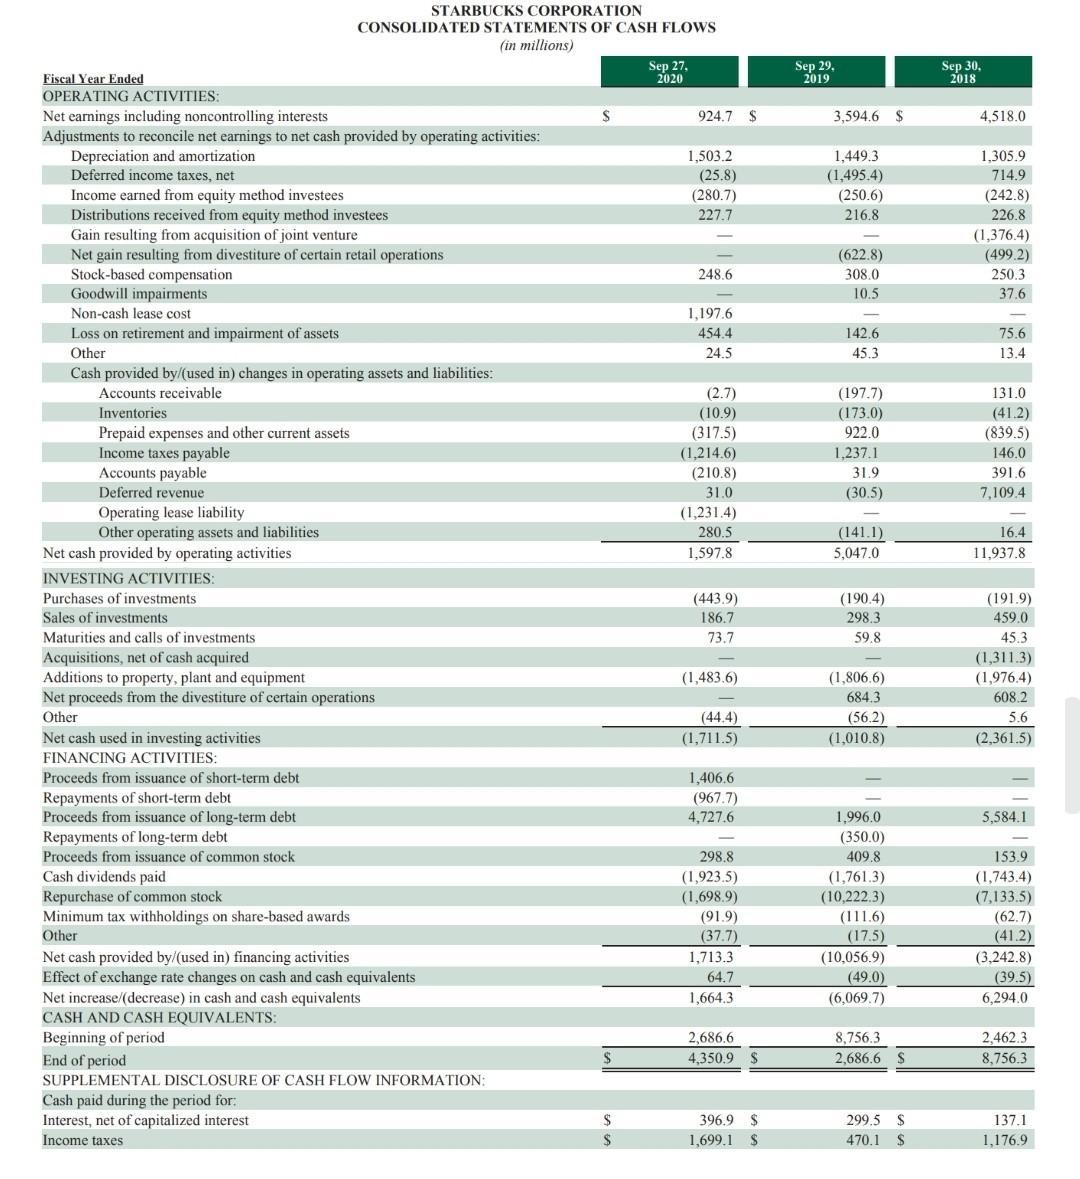 STARBUCKS CORPORATION CONSOLIDATED STATEMENTS OF CASH FLOWS